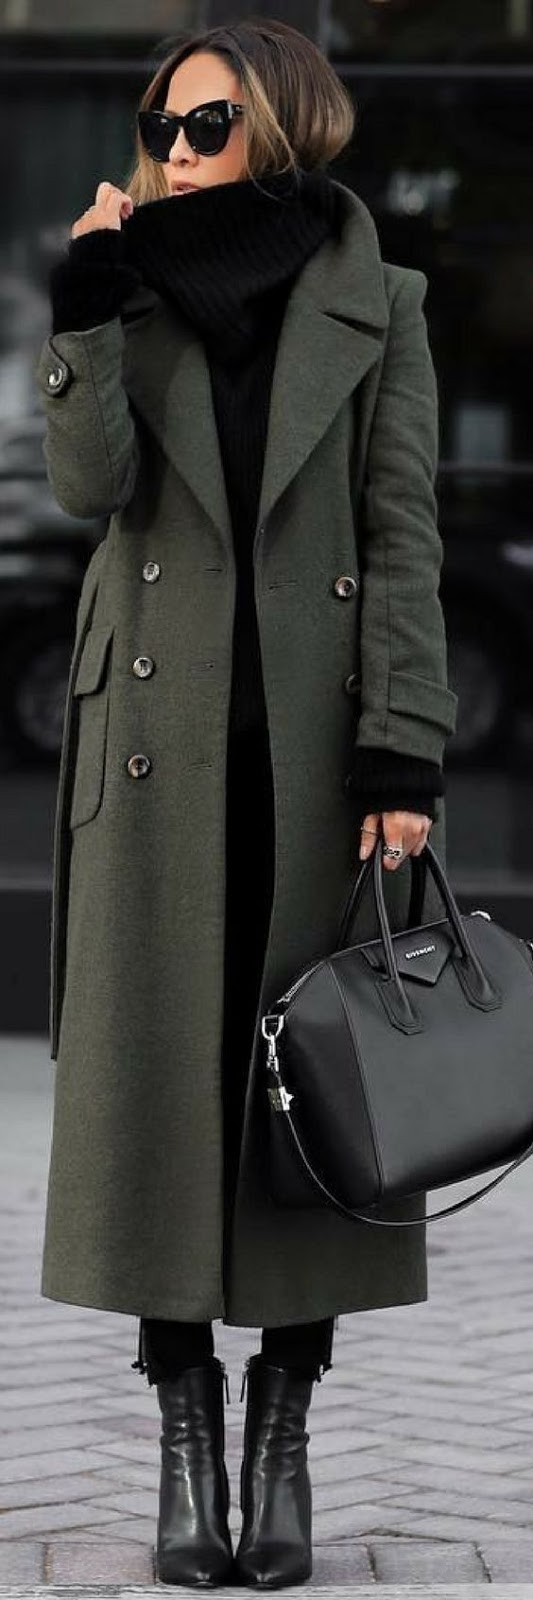 Fall and winter outfit | Turtle neck sweater, super long khaki coat and ...